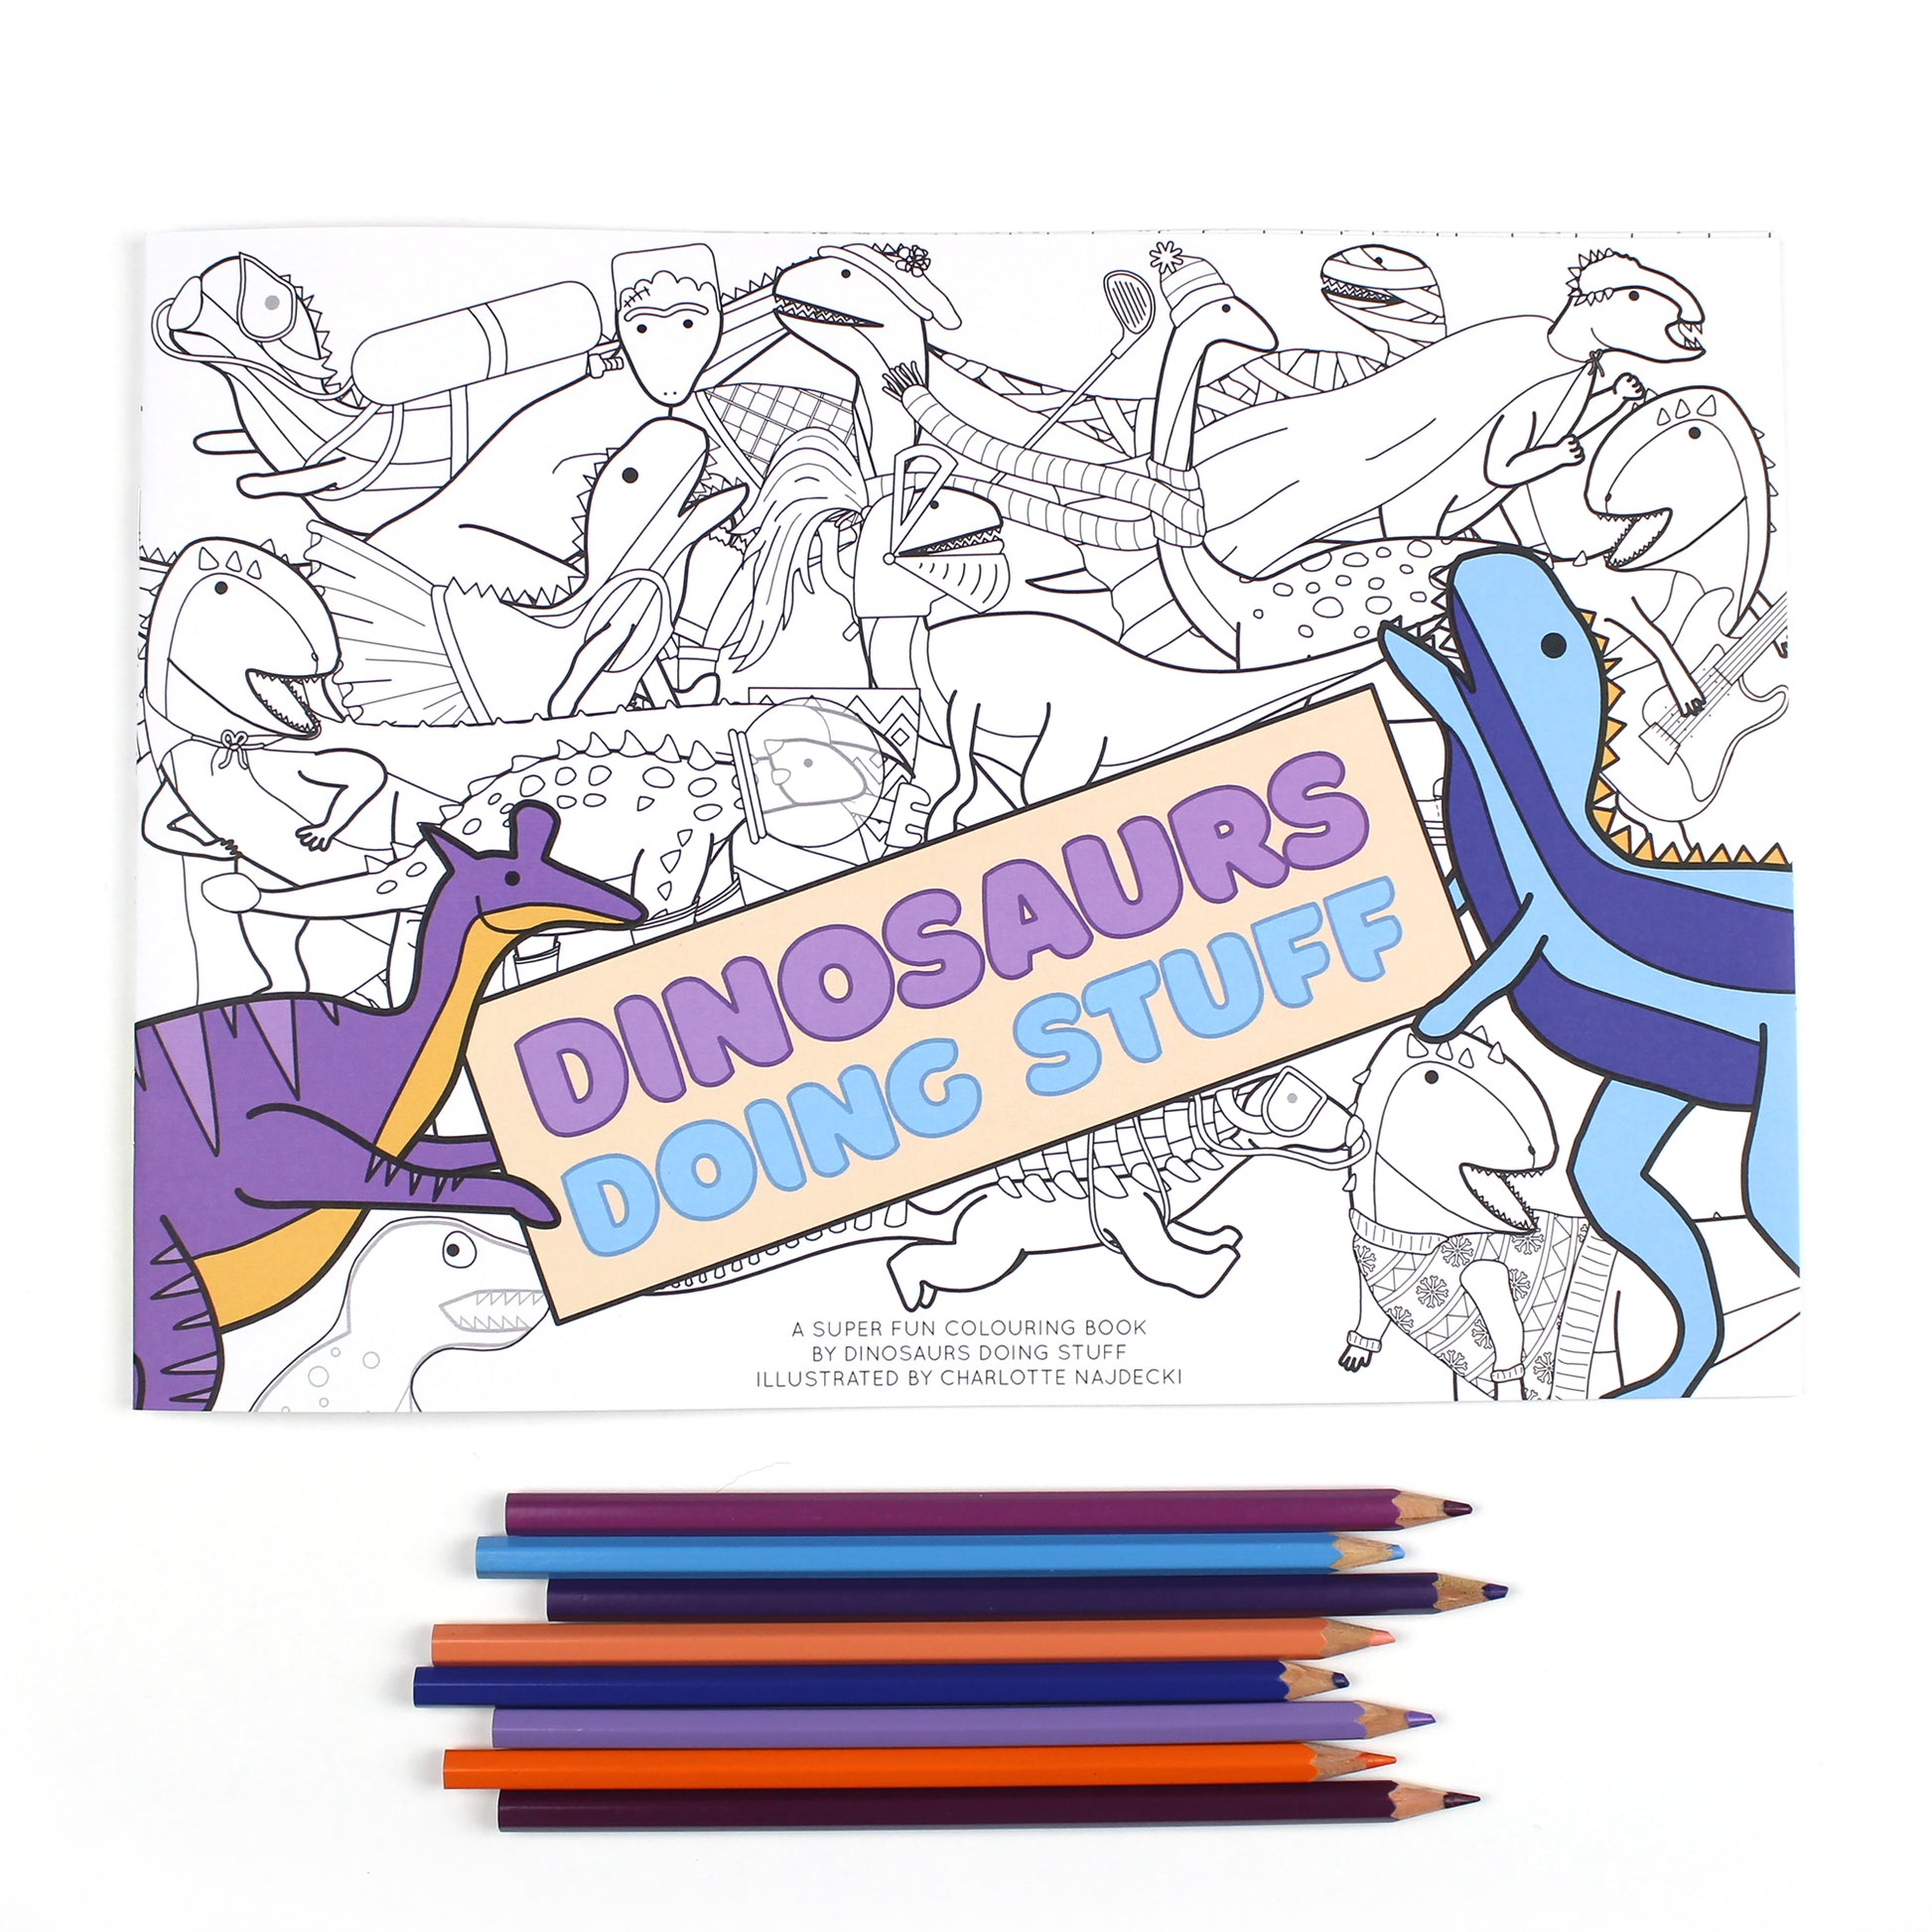 Dinosaurs Doing Stuff colouring book cover with 8 coloured pencils lined up below it